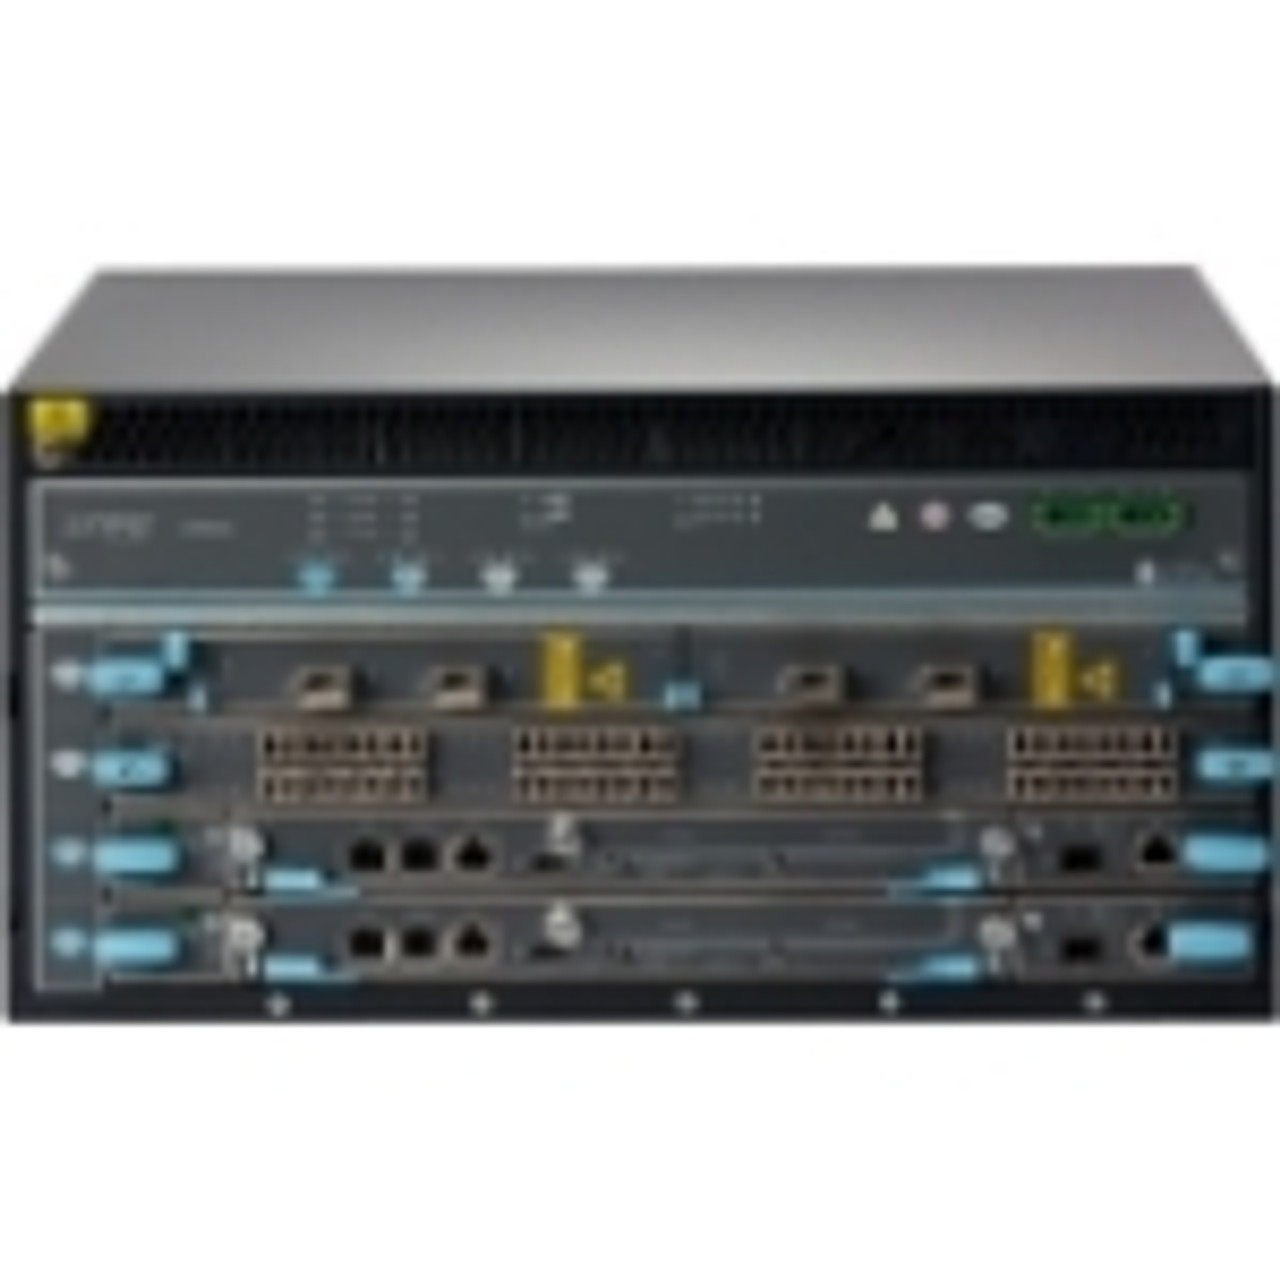 EX9204-BASE-AC-T Juniper Switch Chassis Manageable 4 x Expansion Slots 3 Layer Supported 6U High Rack-mountable 1 Year (Refurbished)